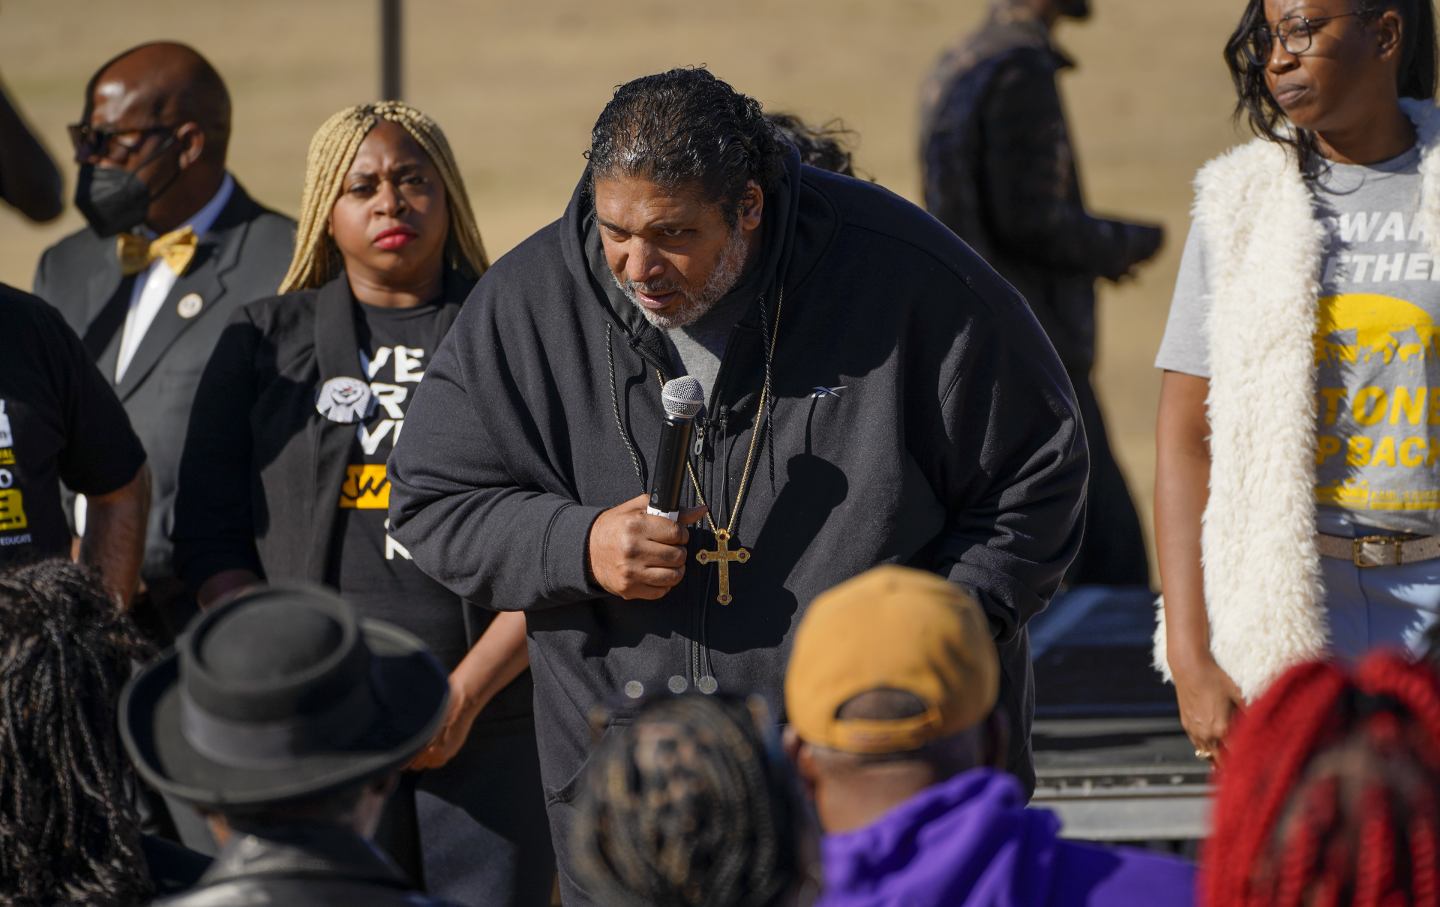 The Rev. William Barber on Trump’s Holy Week Gambit: “The Bible Exposes Grifters”